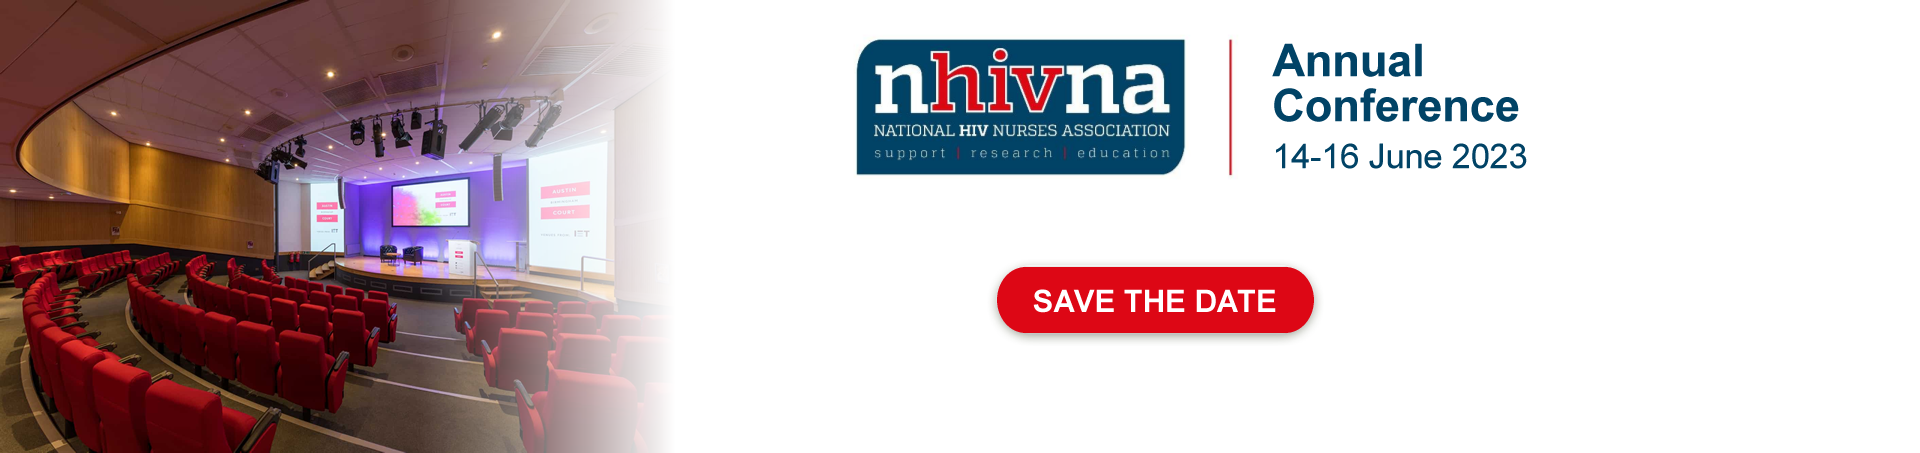 25th Annual Conference of NHIVNA